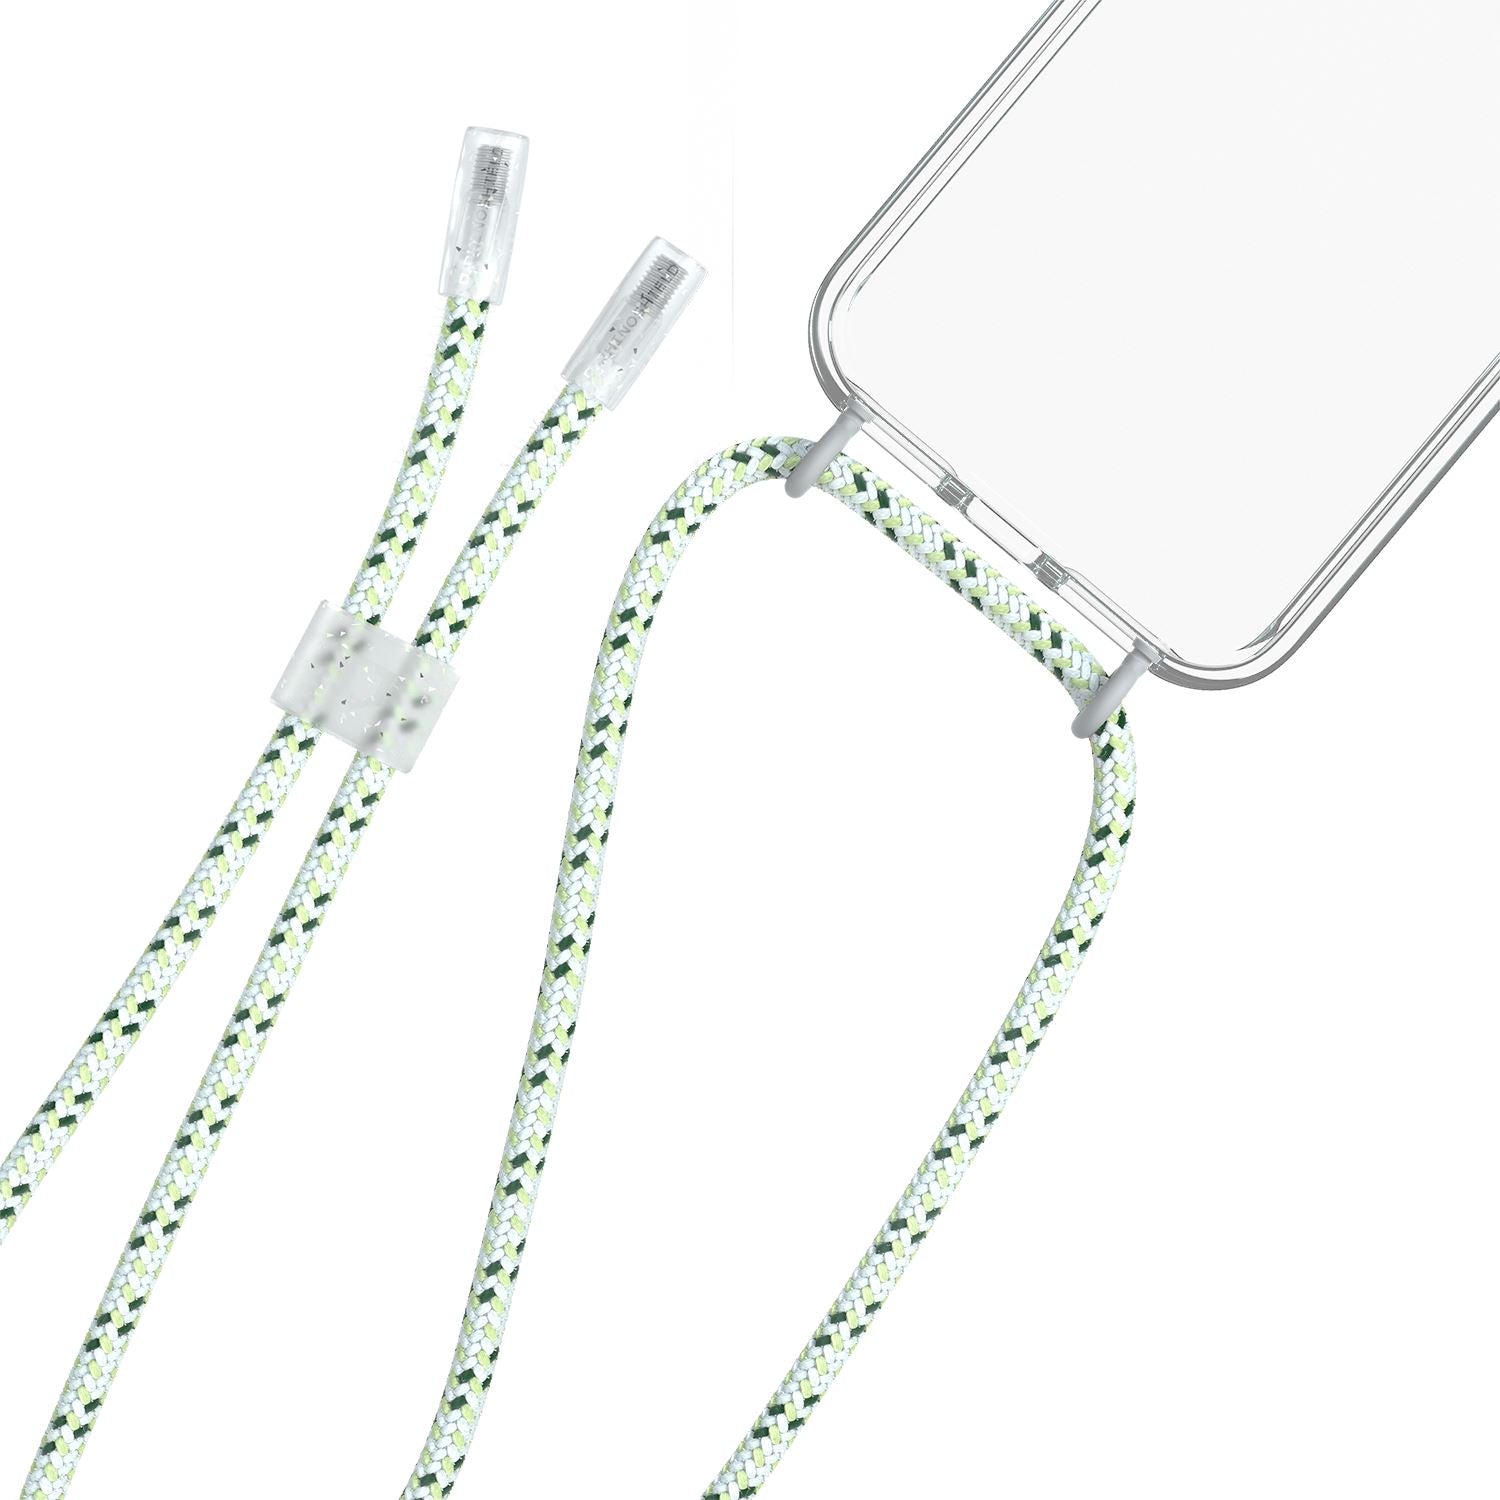 RhinoShield Lanyard for Clear Case with 3 colors of hook and 1 lanyard aglet Default RhinoShield Pistachio Green 